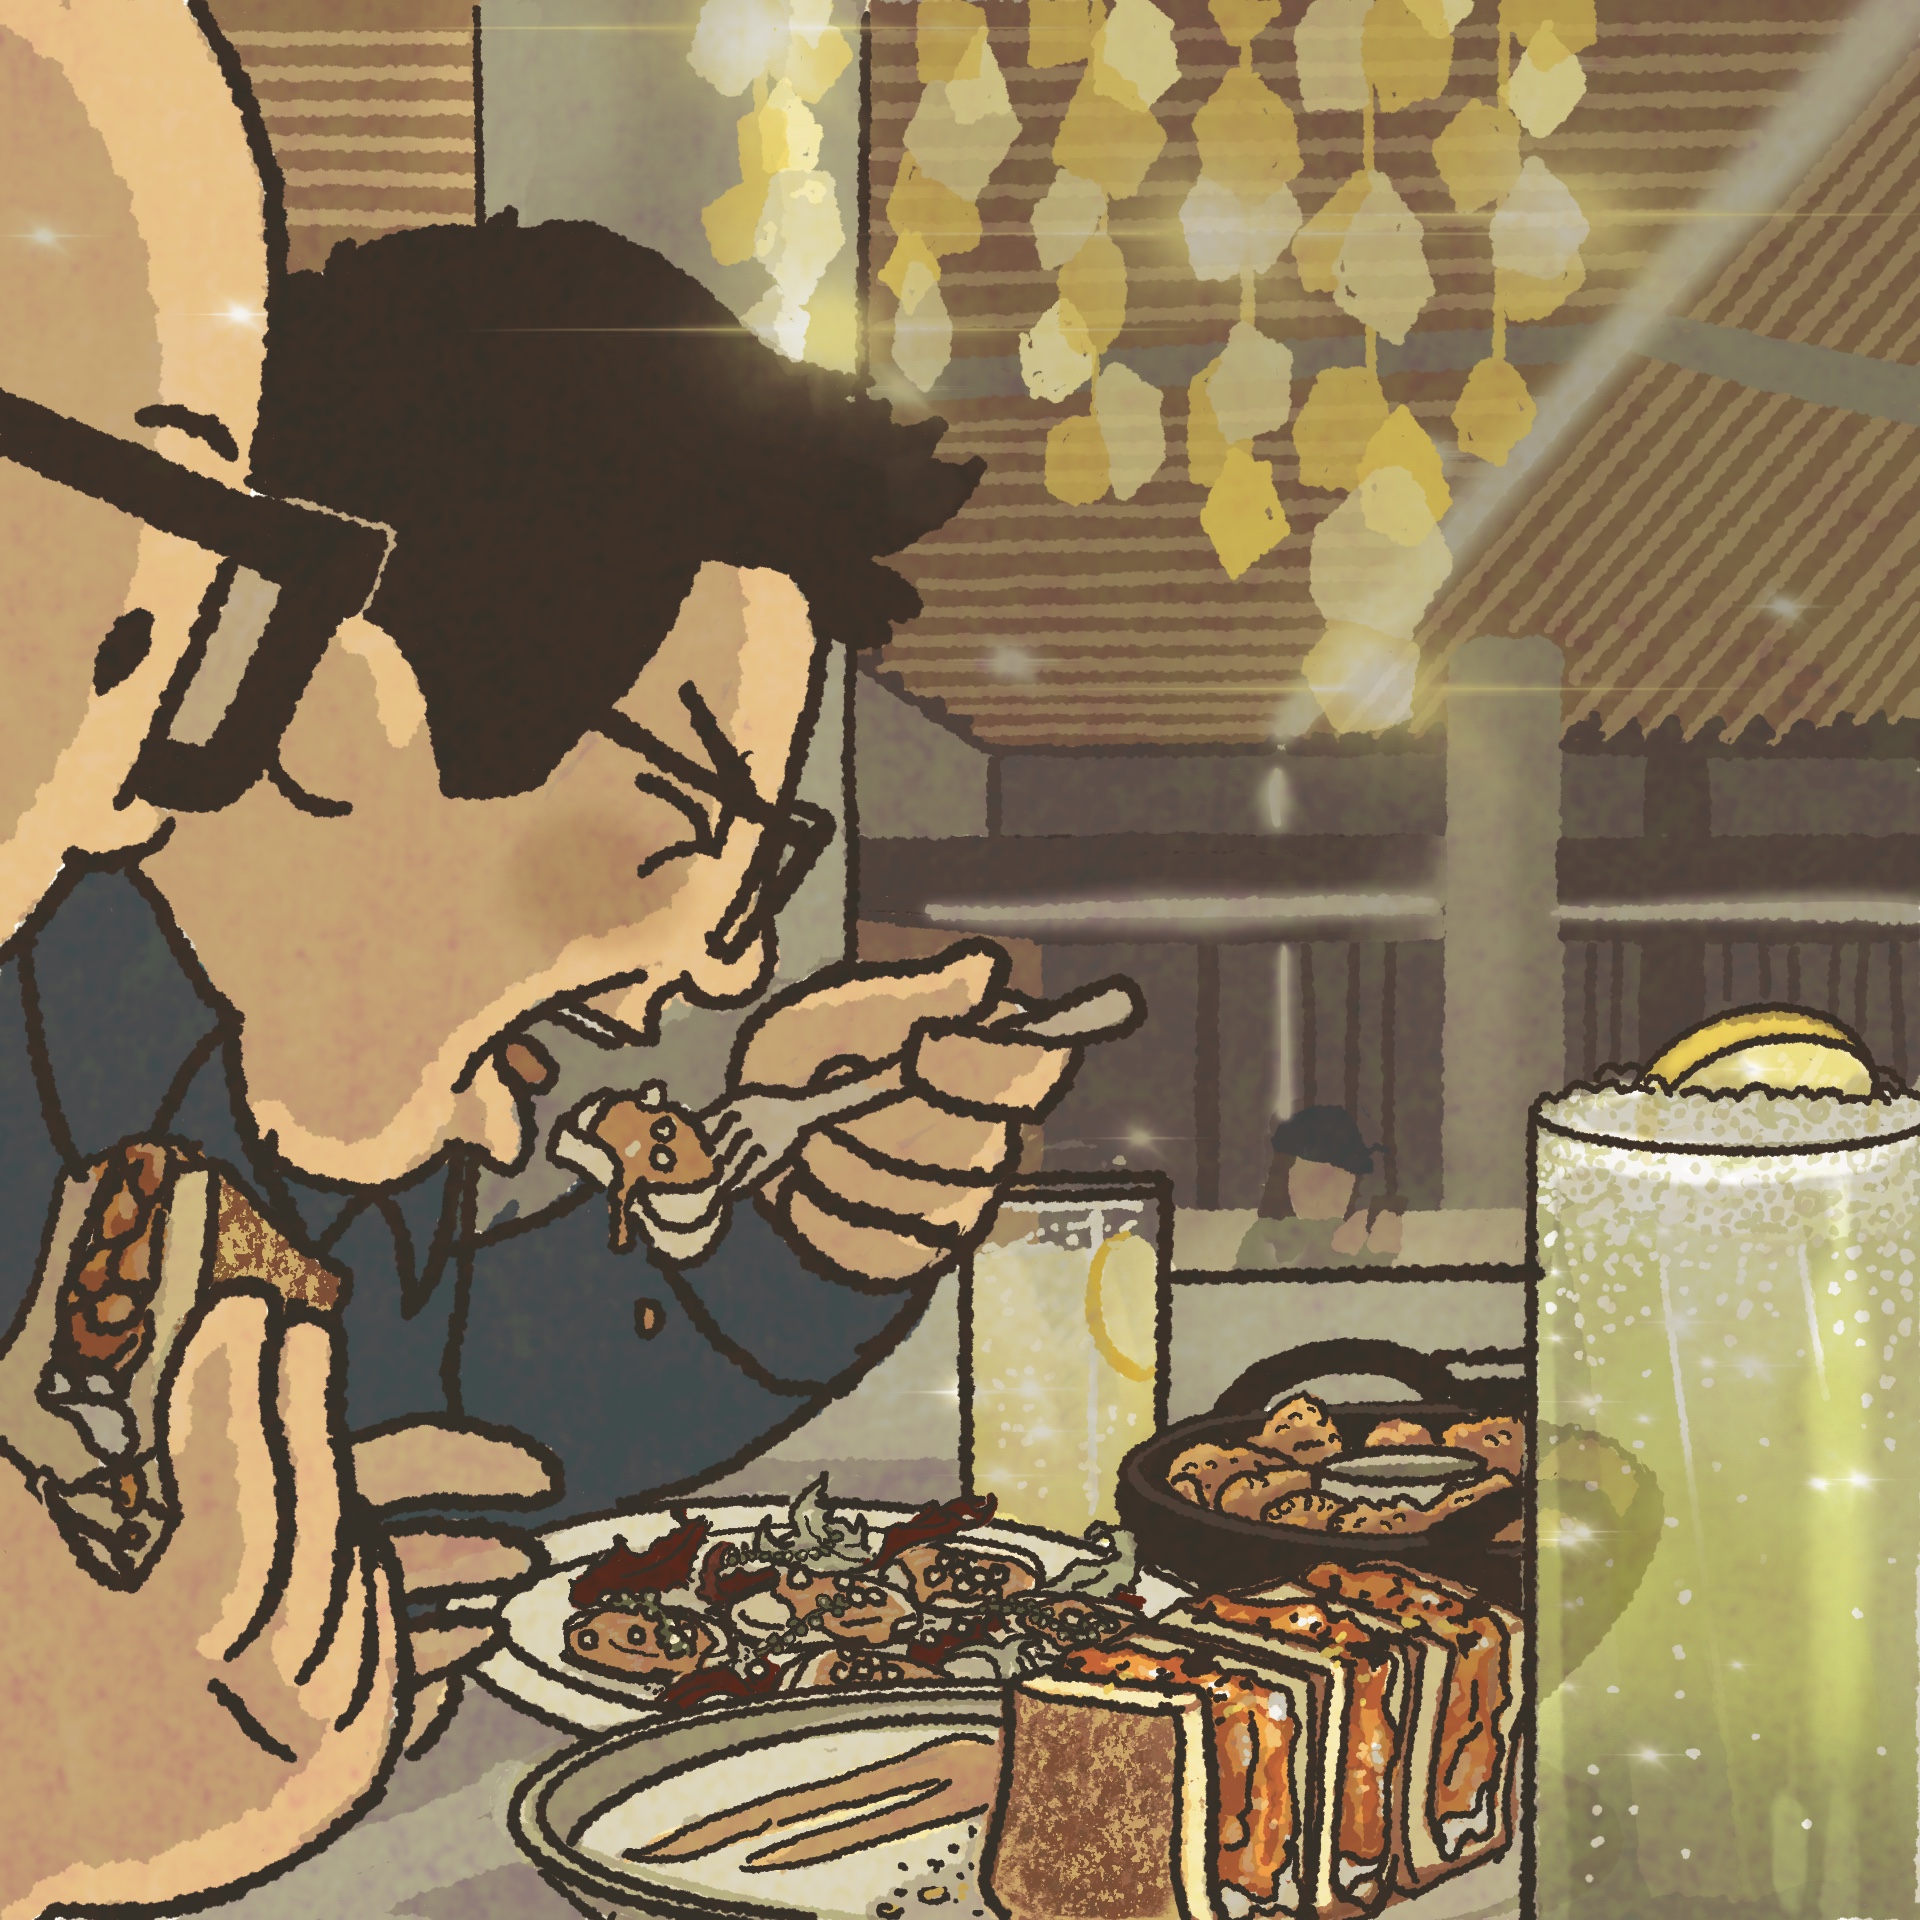 Illustration: a man shovels scallops into his mouth while sitting at an elegant bar. On the counter are tidy lobster sandwiches and fizzy cocktails in highball glasses.